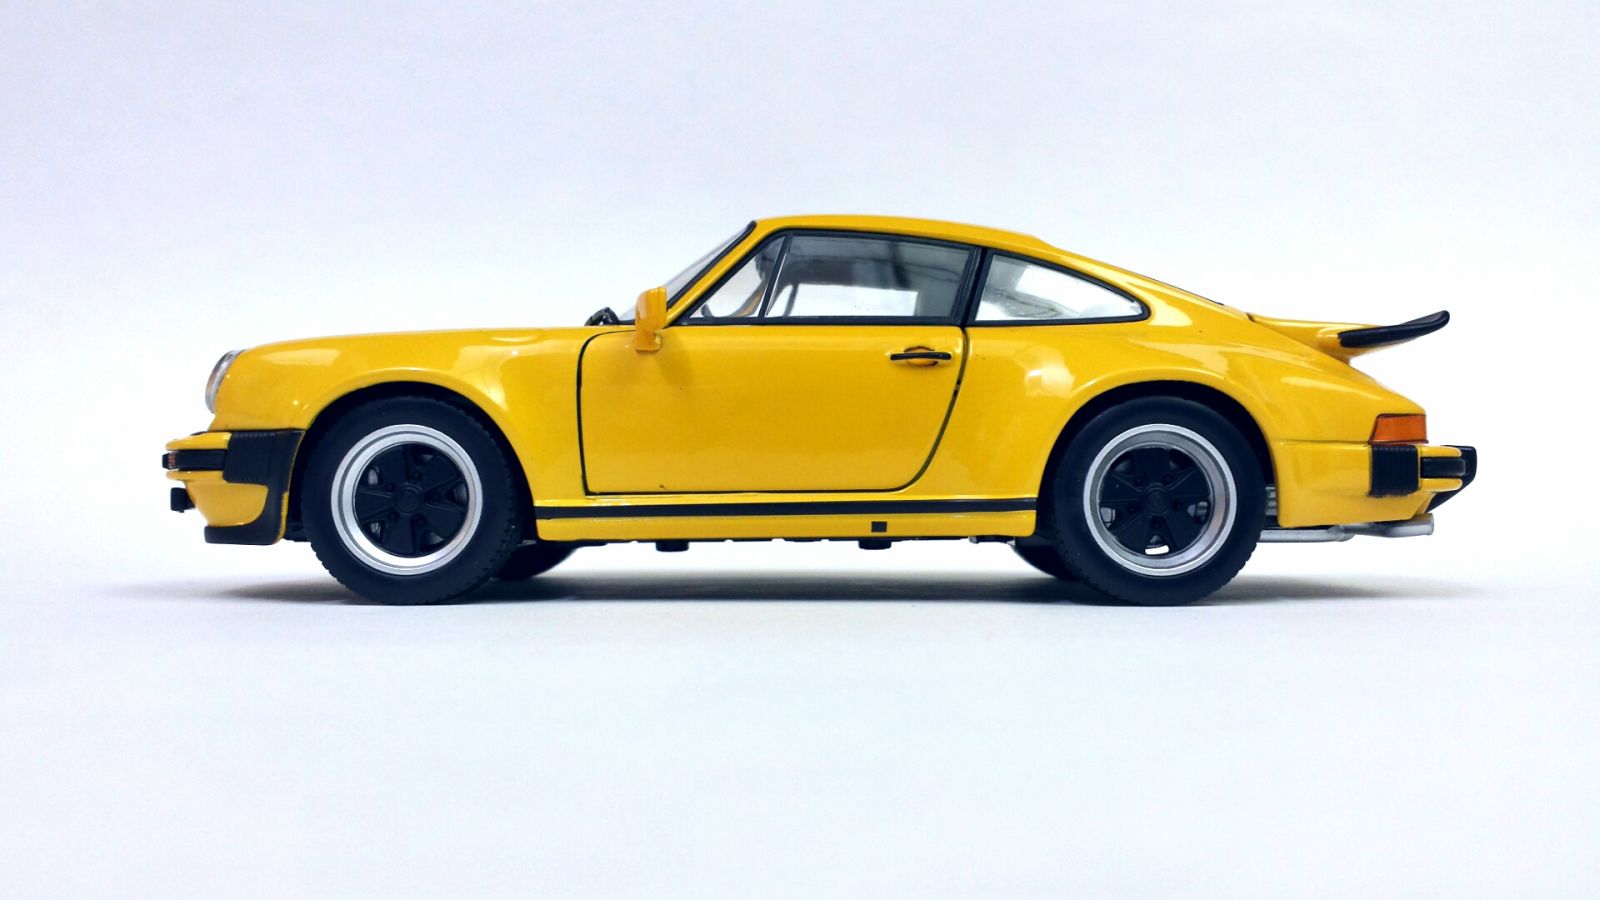 Illustration for article titled Teutonic Turbo 911 Tuesday